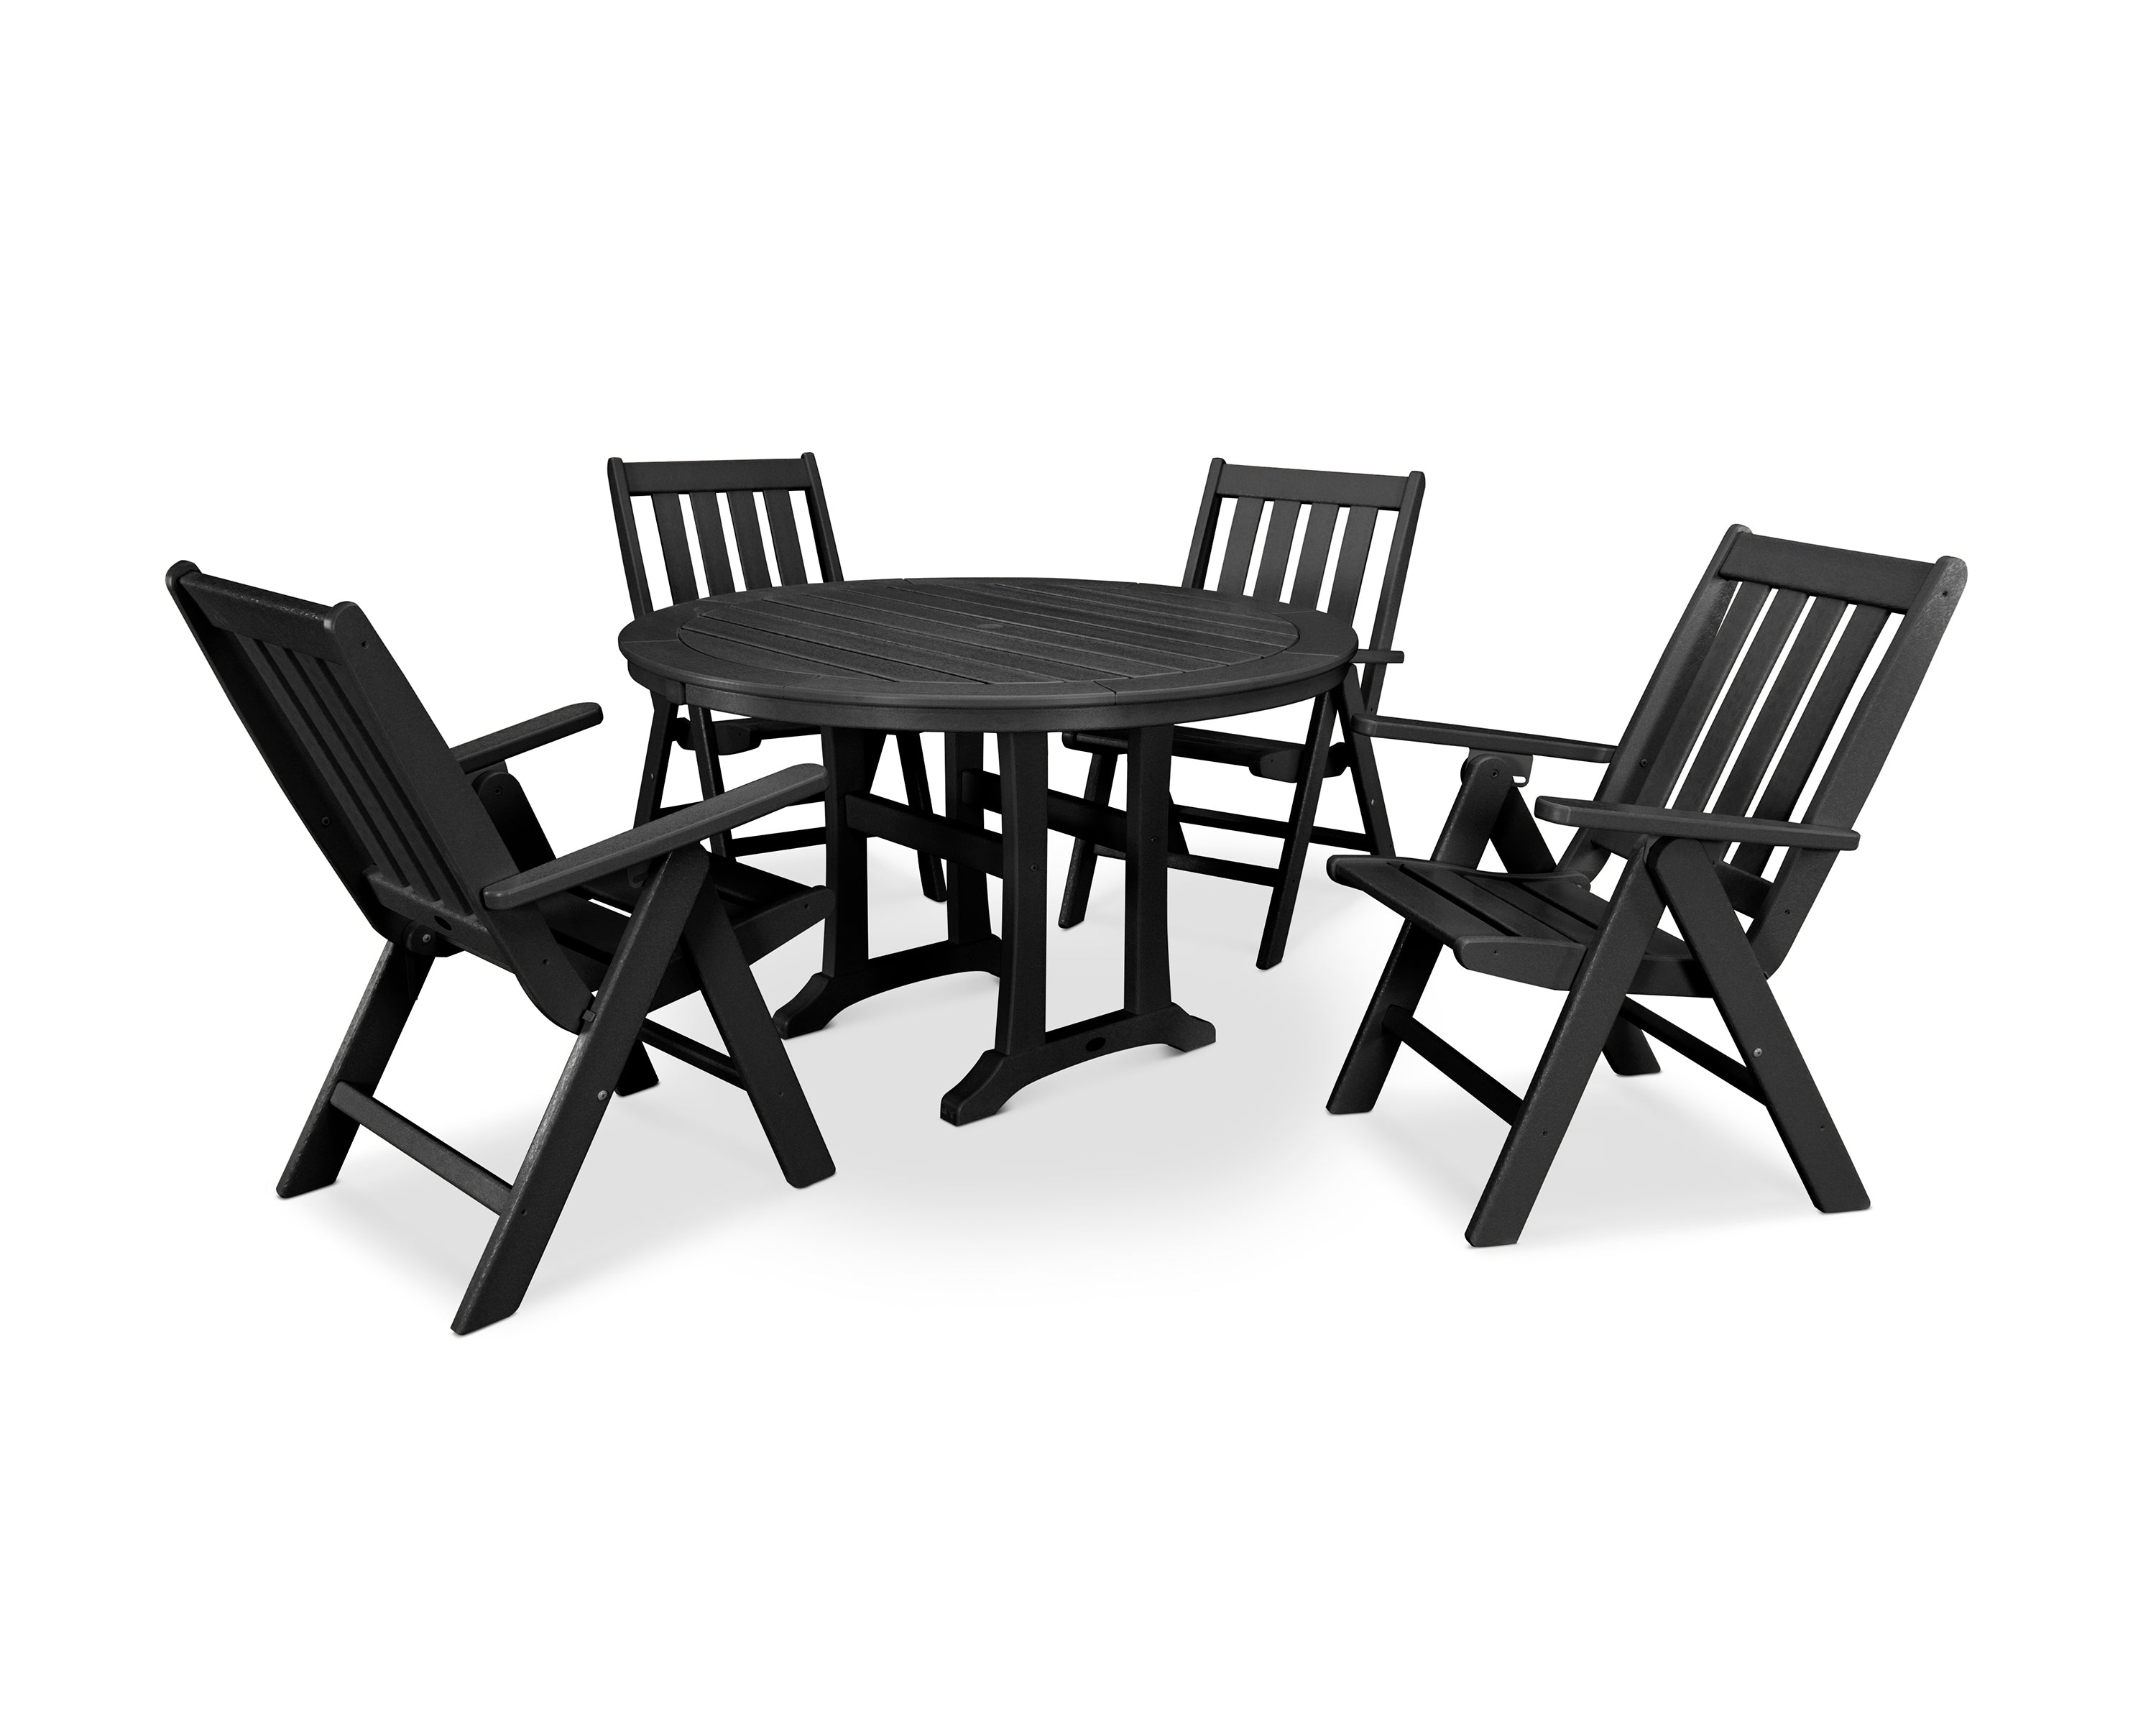 POLYWOOD® Vineyard Folding Chair 5-Piece Round Dining Set with Trestle Legs in Black